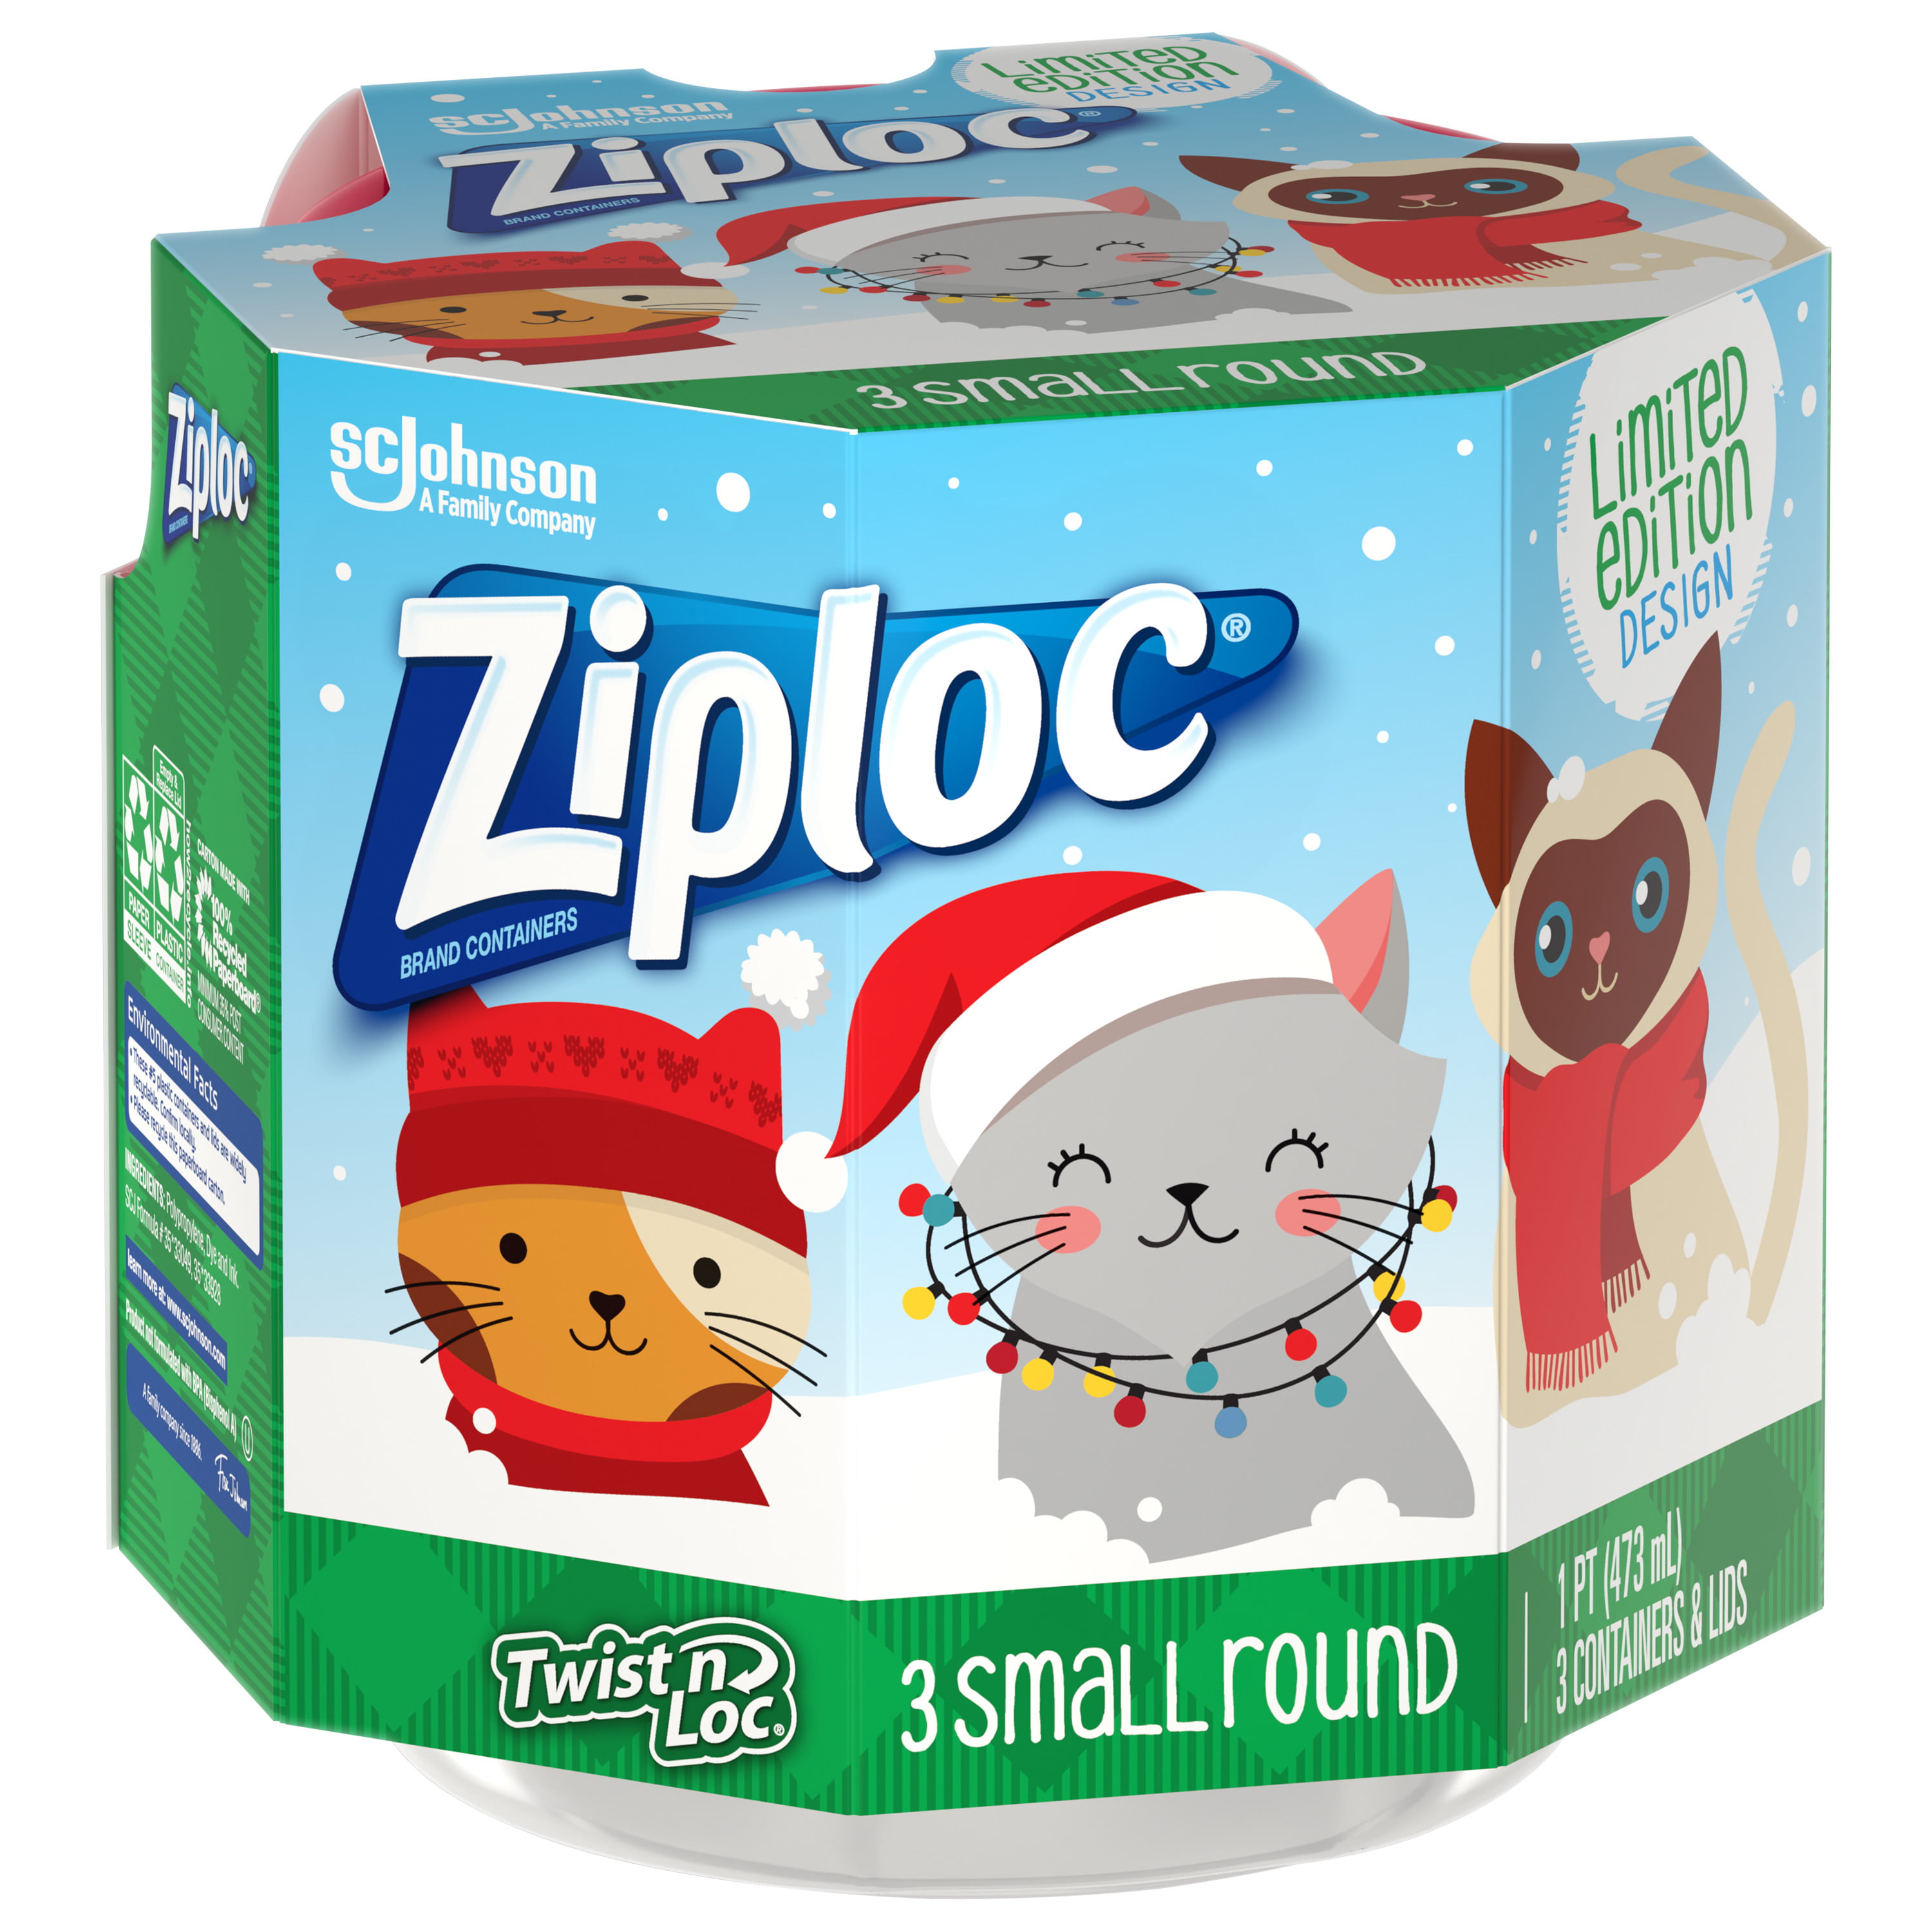 Ziploc Limited Edition Holiday Design Small Round Containers & Lids - 3  Pack, 1 pt - Ralphs